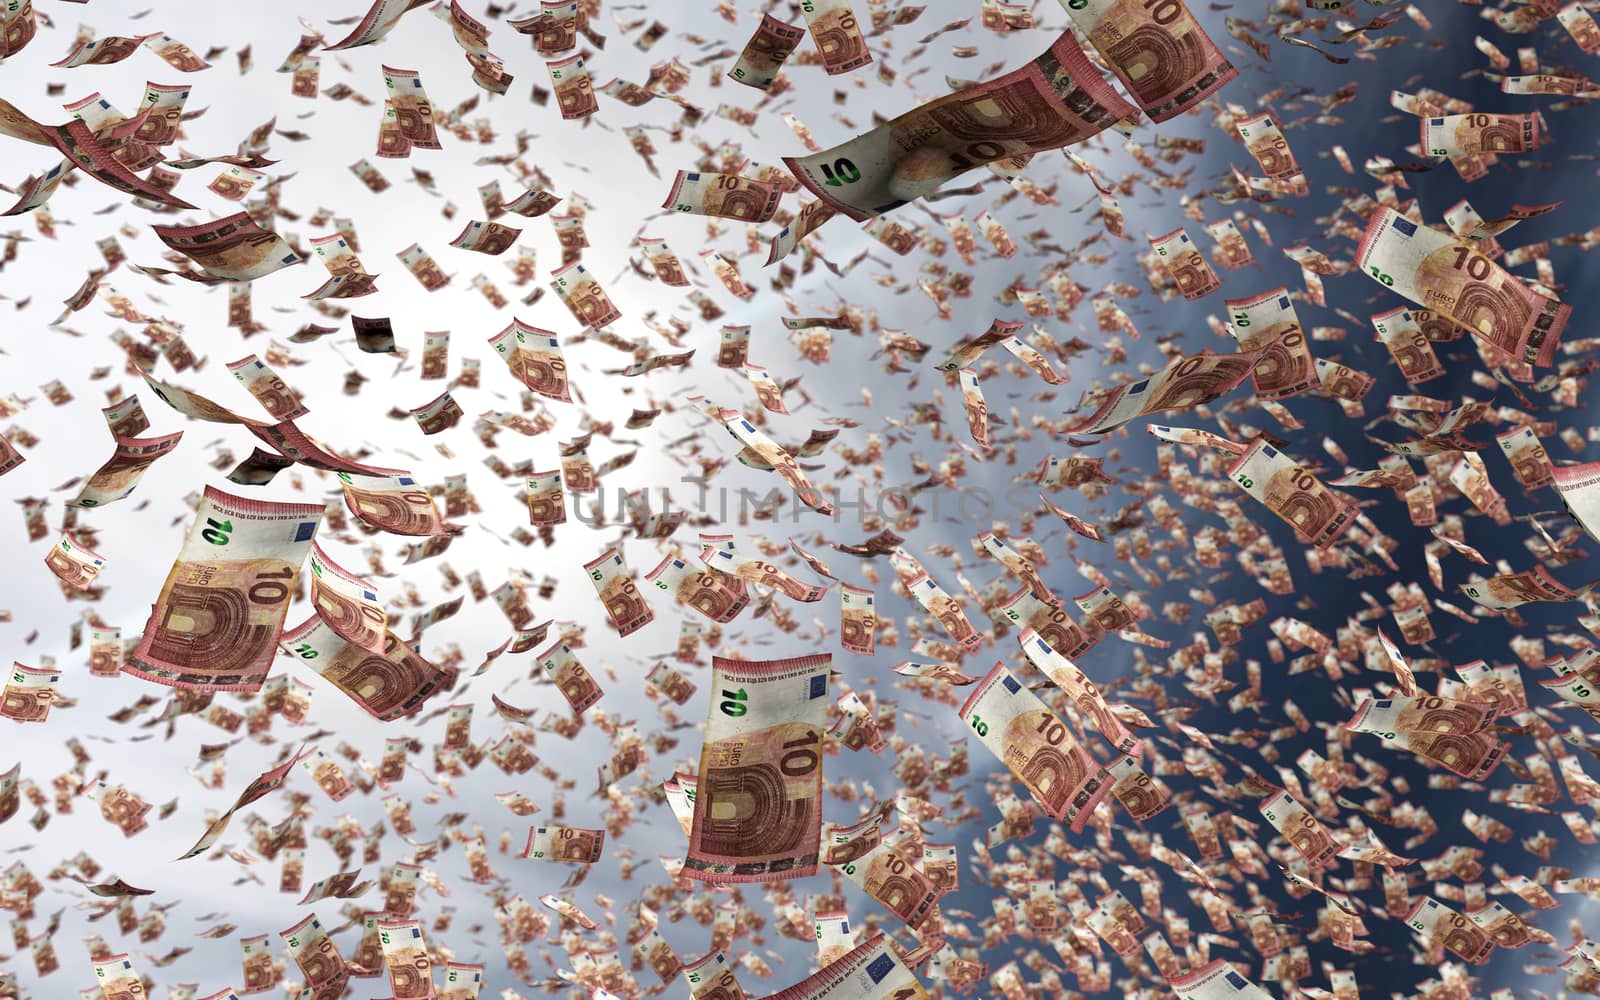 3d rendering of money euros raining from the sky by F1b0nacci